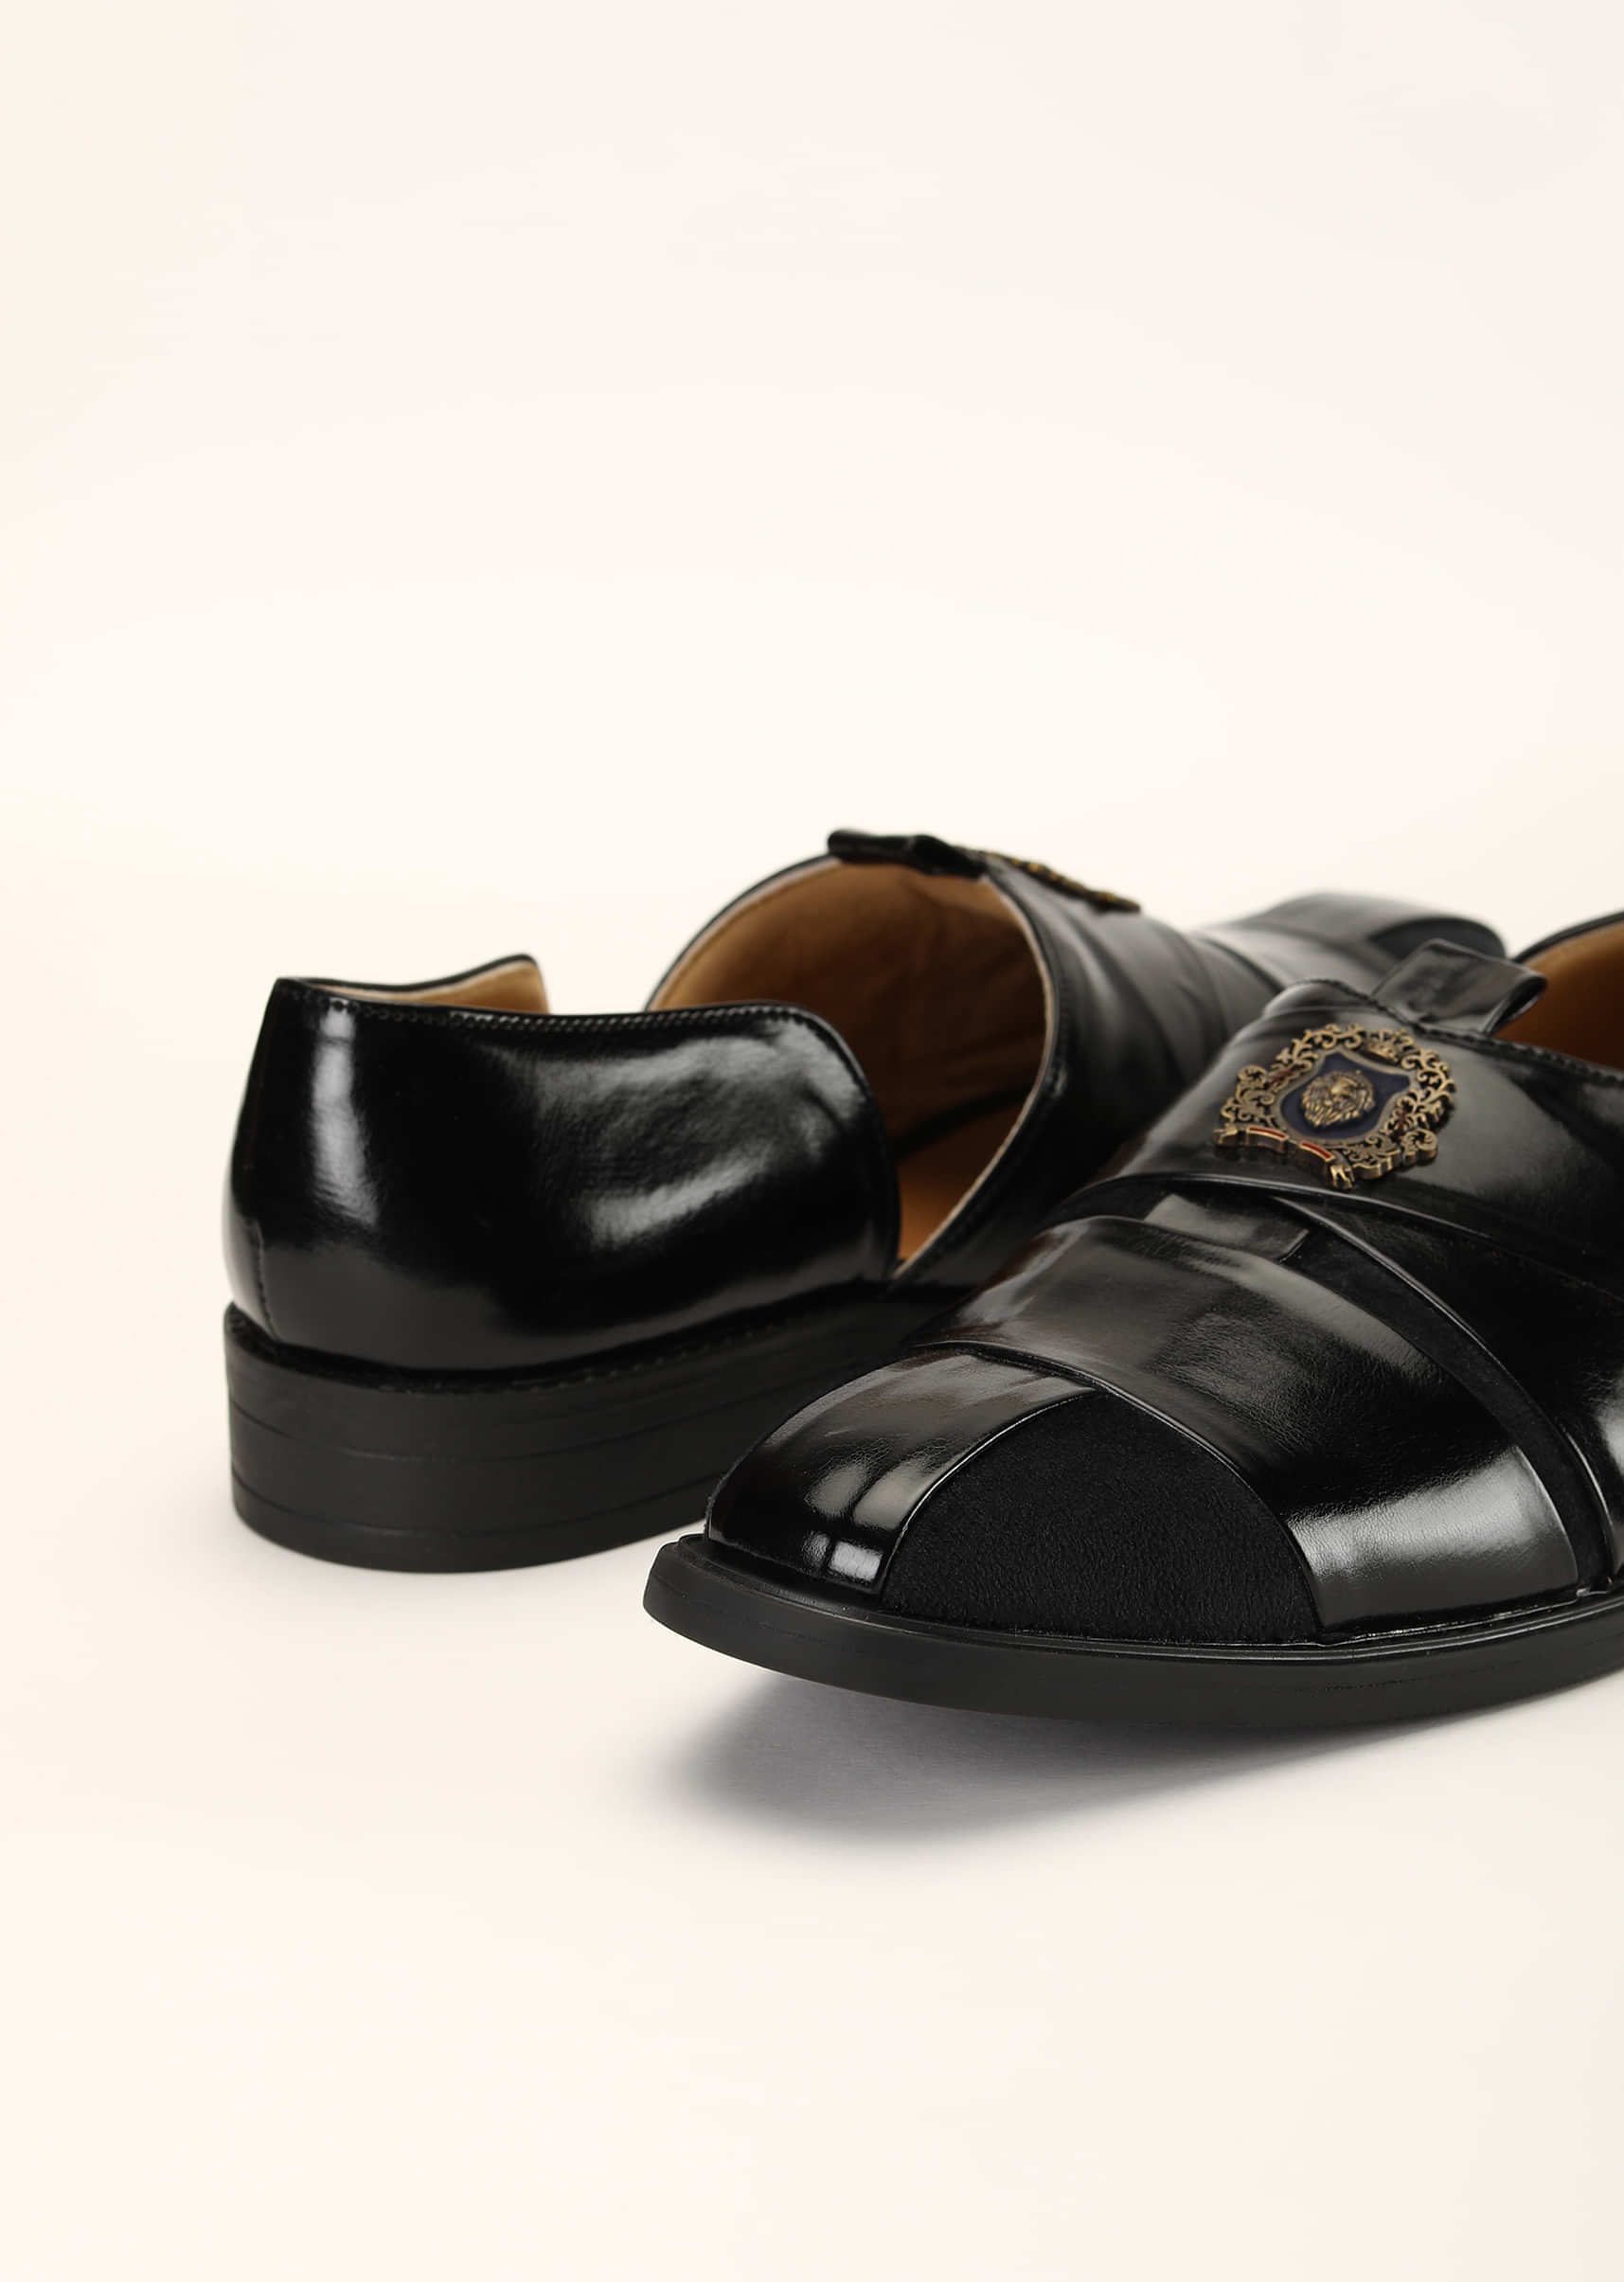 Black Peshawari Footwear In Rexine And Suede Leather Embellished With A Brooch